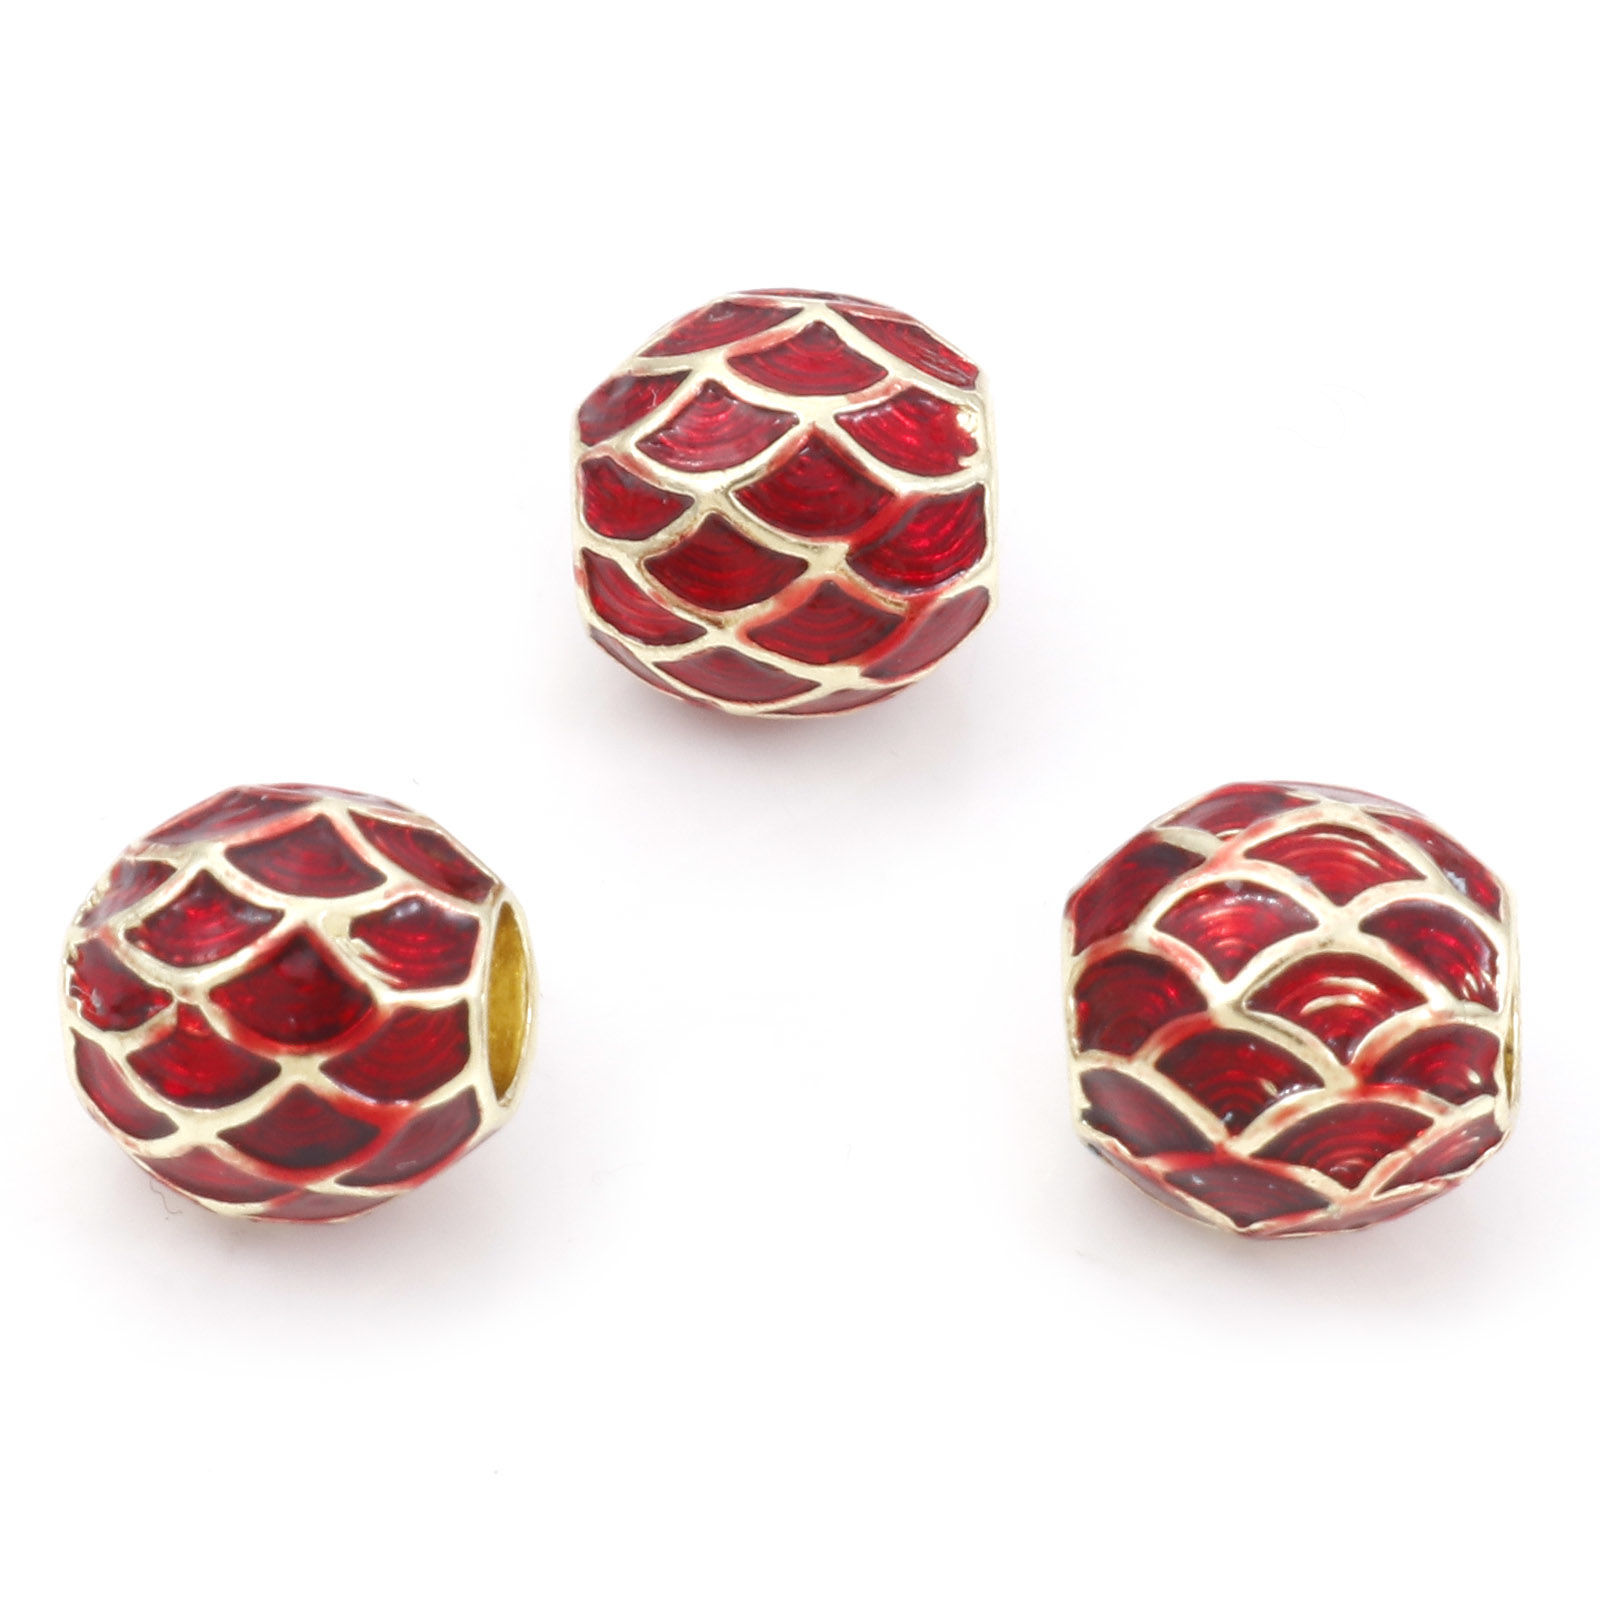 Picture of Zinc Based Alloy European Style Large Hole Charm Beads Gold Plated Barrel Fish Scale Enamel 10mm x 10mm, Hole: Approx 4mm, 5 PCs